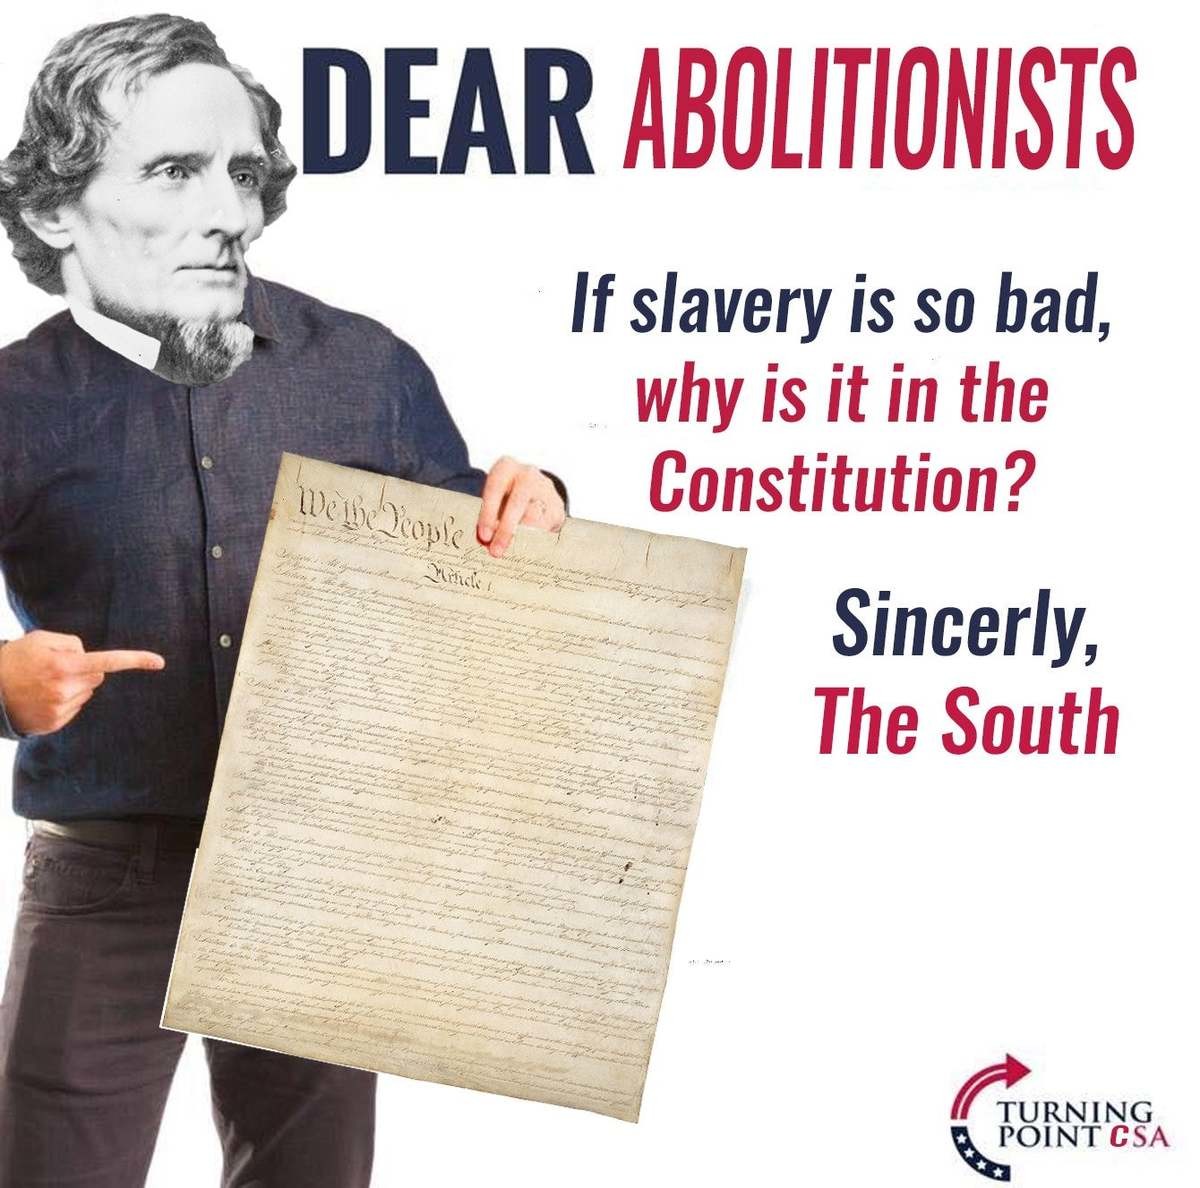 Abolitionists. .. dear slavers, if slavery is so good, then why did you lose the war? sincerely, the north